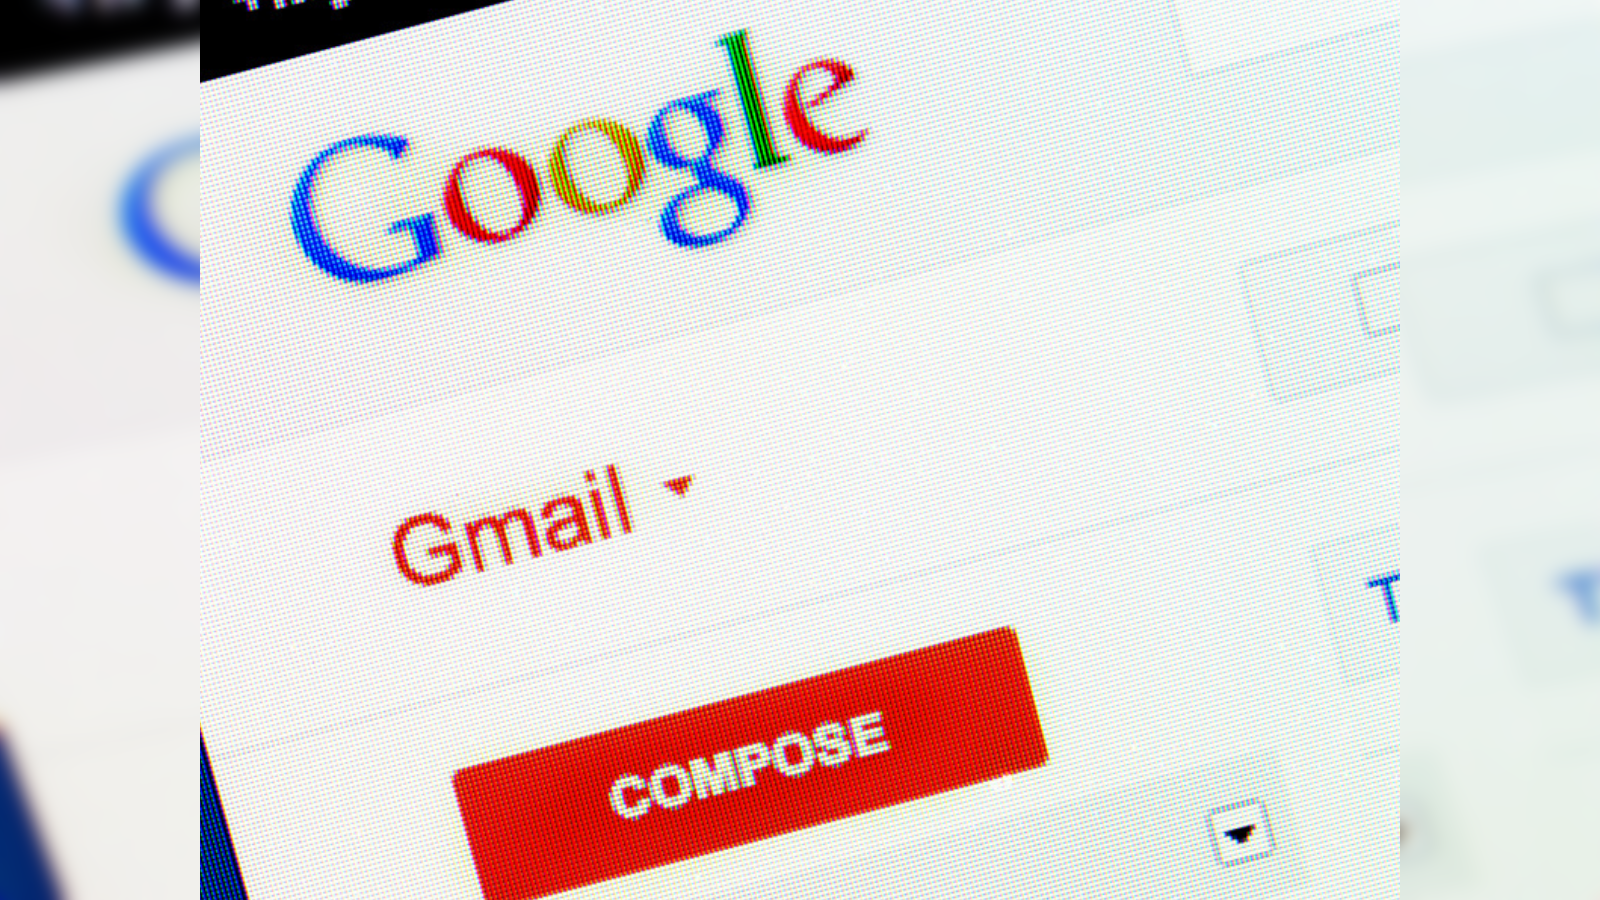 How to Turn Gmail into an Online Storage - Hongkiat